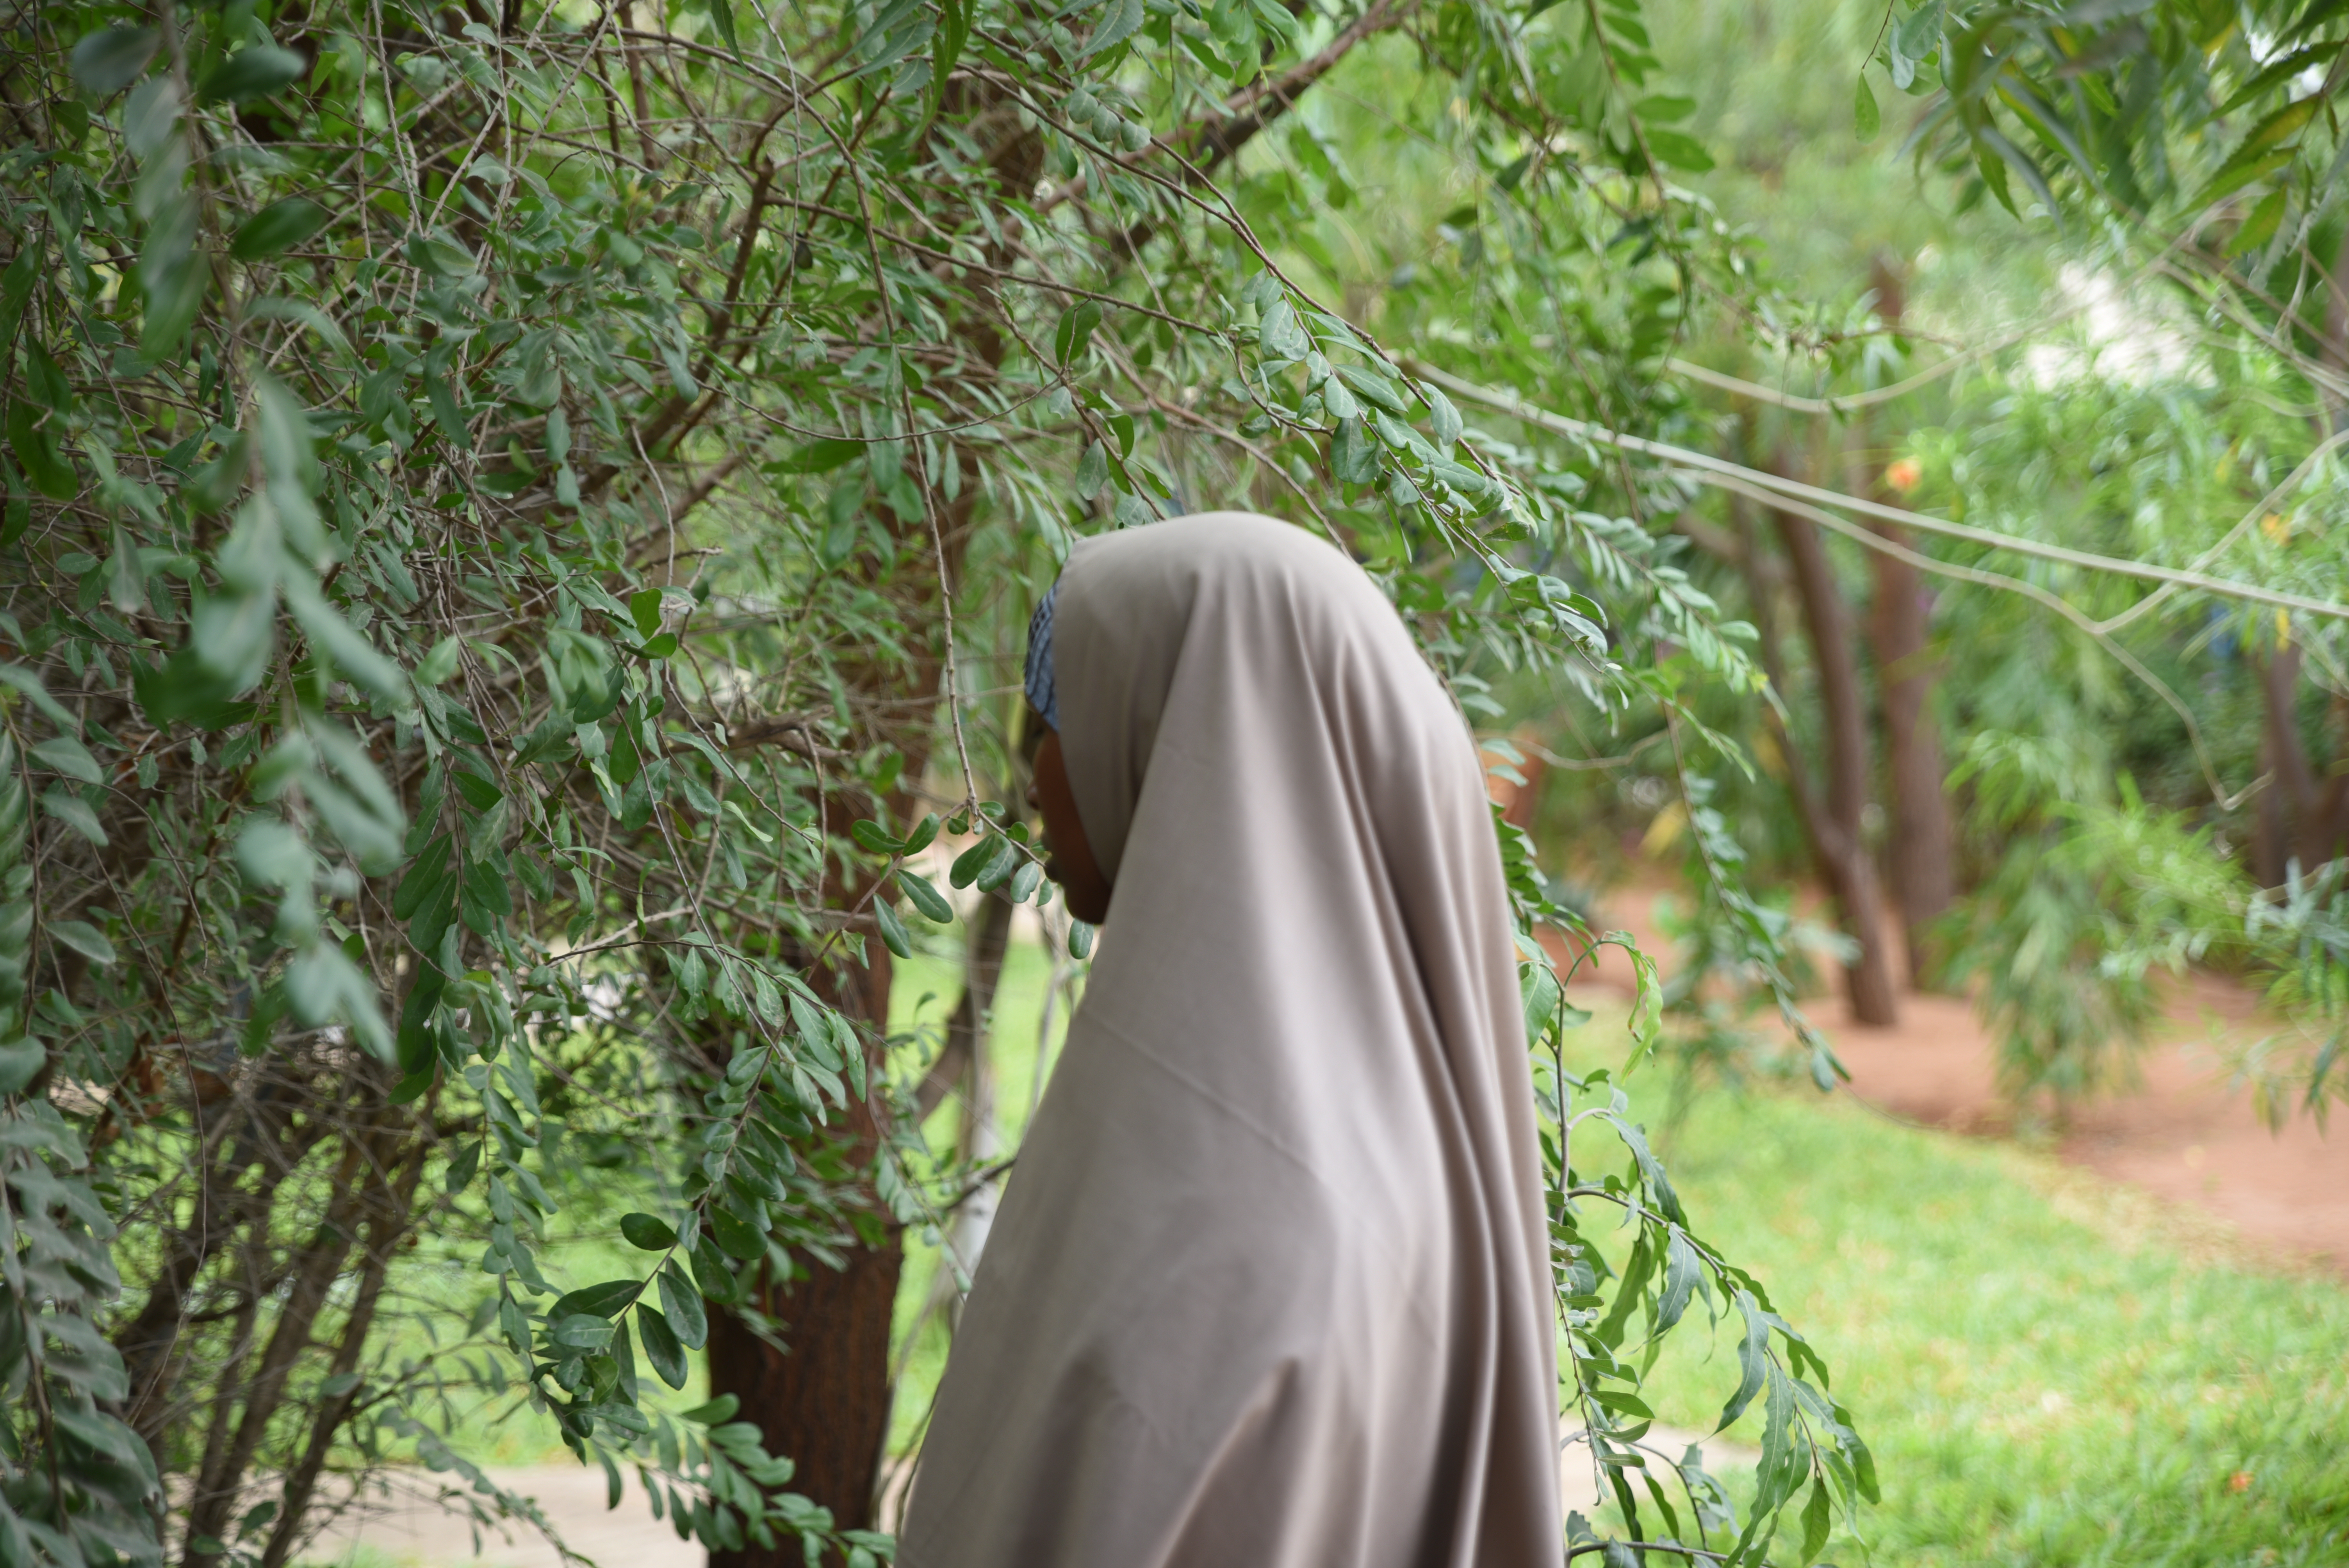 Meet a Young Woman Determined to End FGM in Dadaab